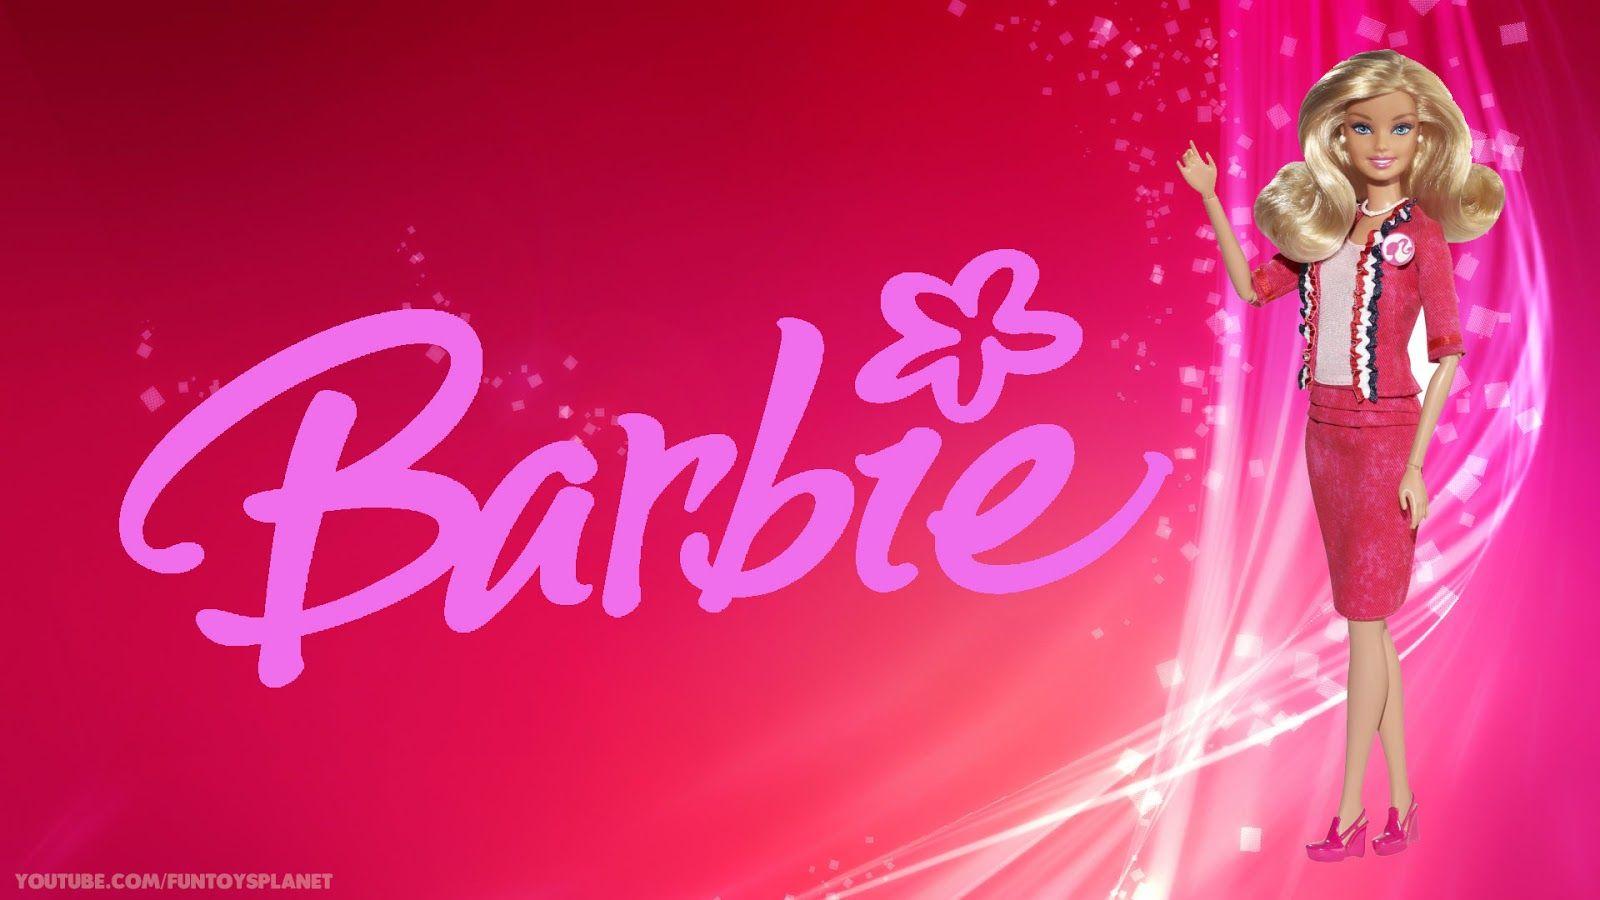 Wallpapers Barbie Top Barbie Backgrounds YQ Awesome Wallpapers